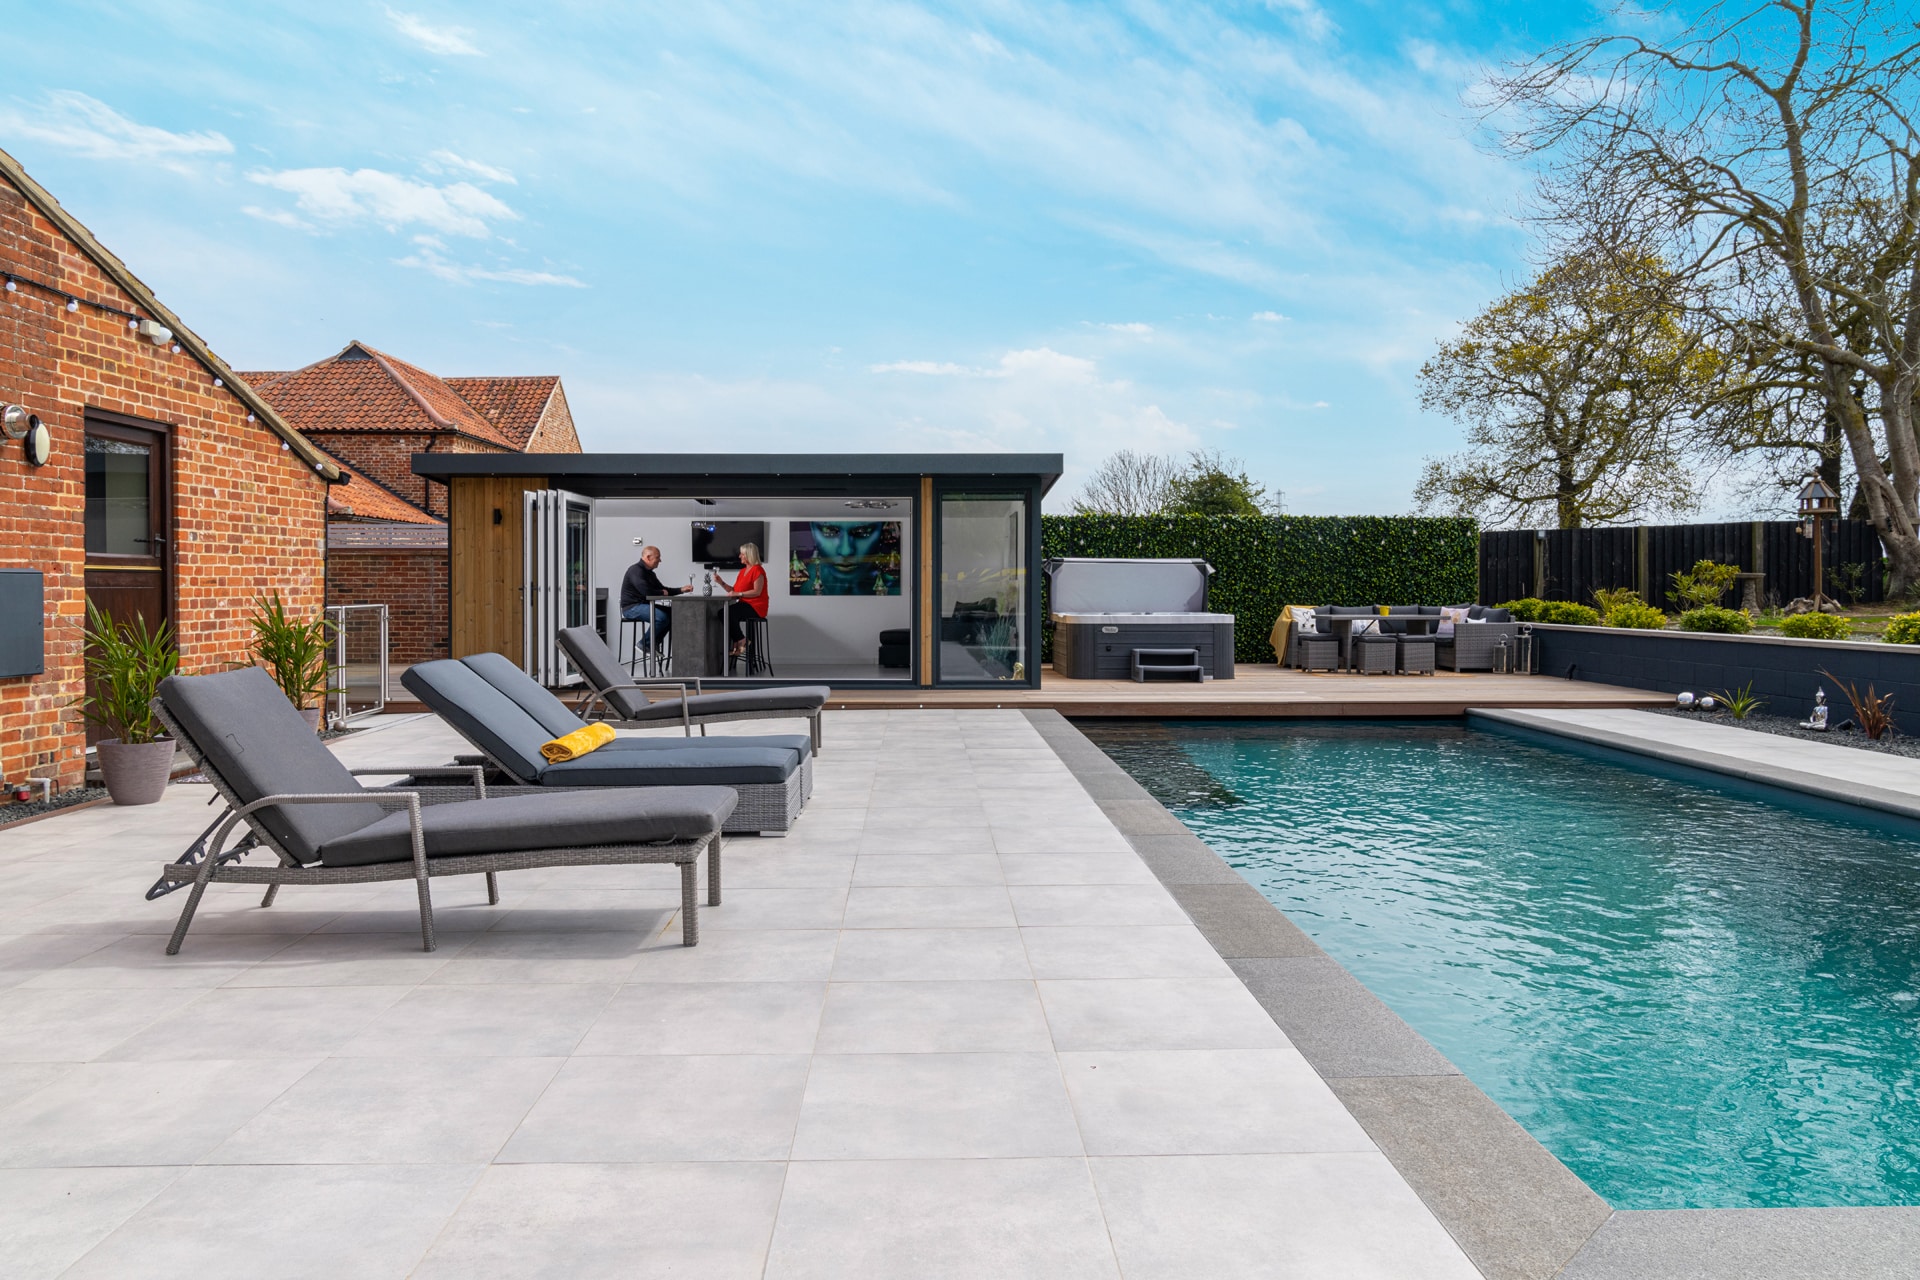 Modern swimming pool surrounded by light grey paving with sun loungers on. Garden bar with customers in background.